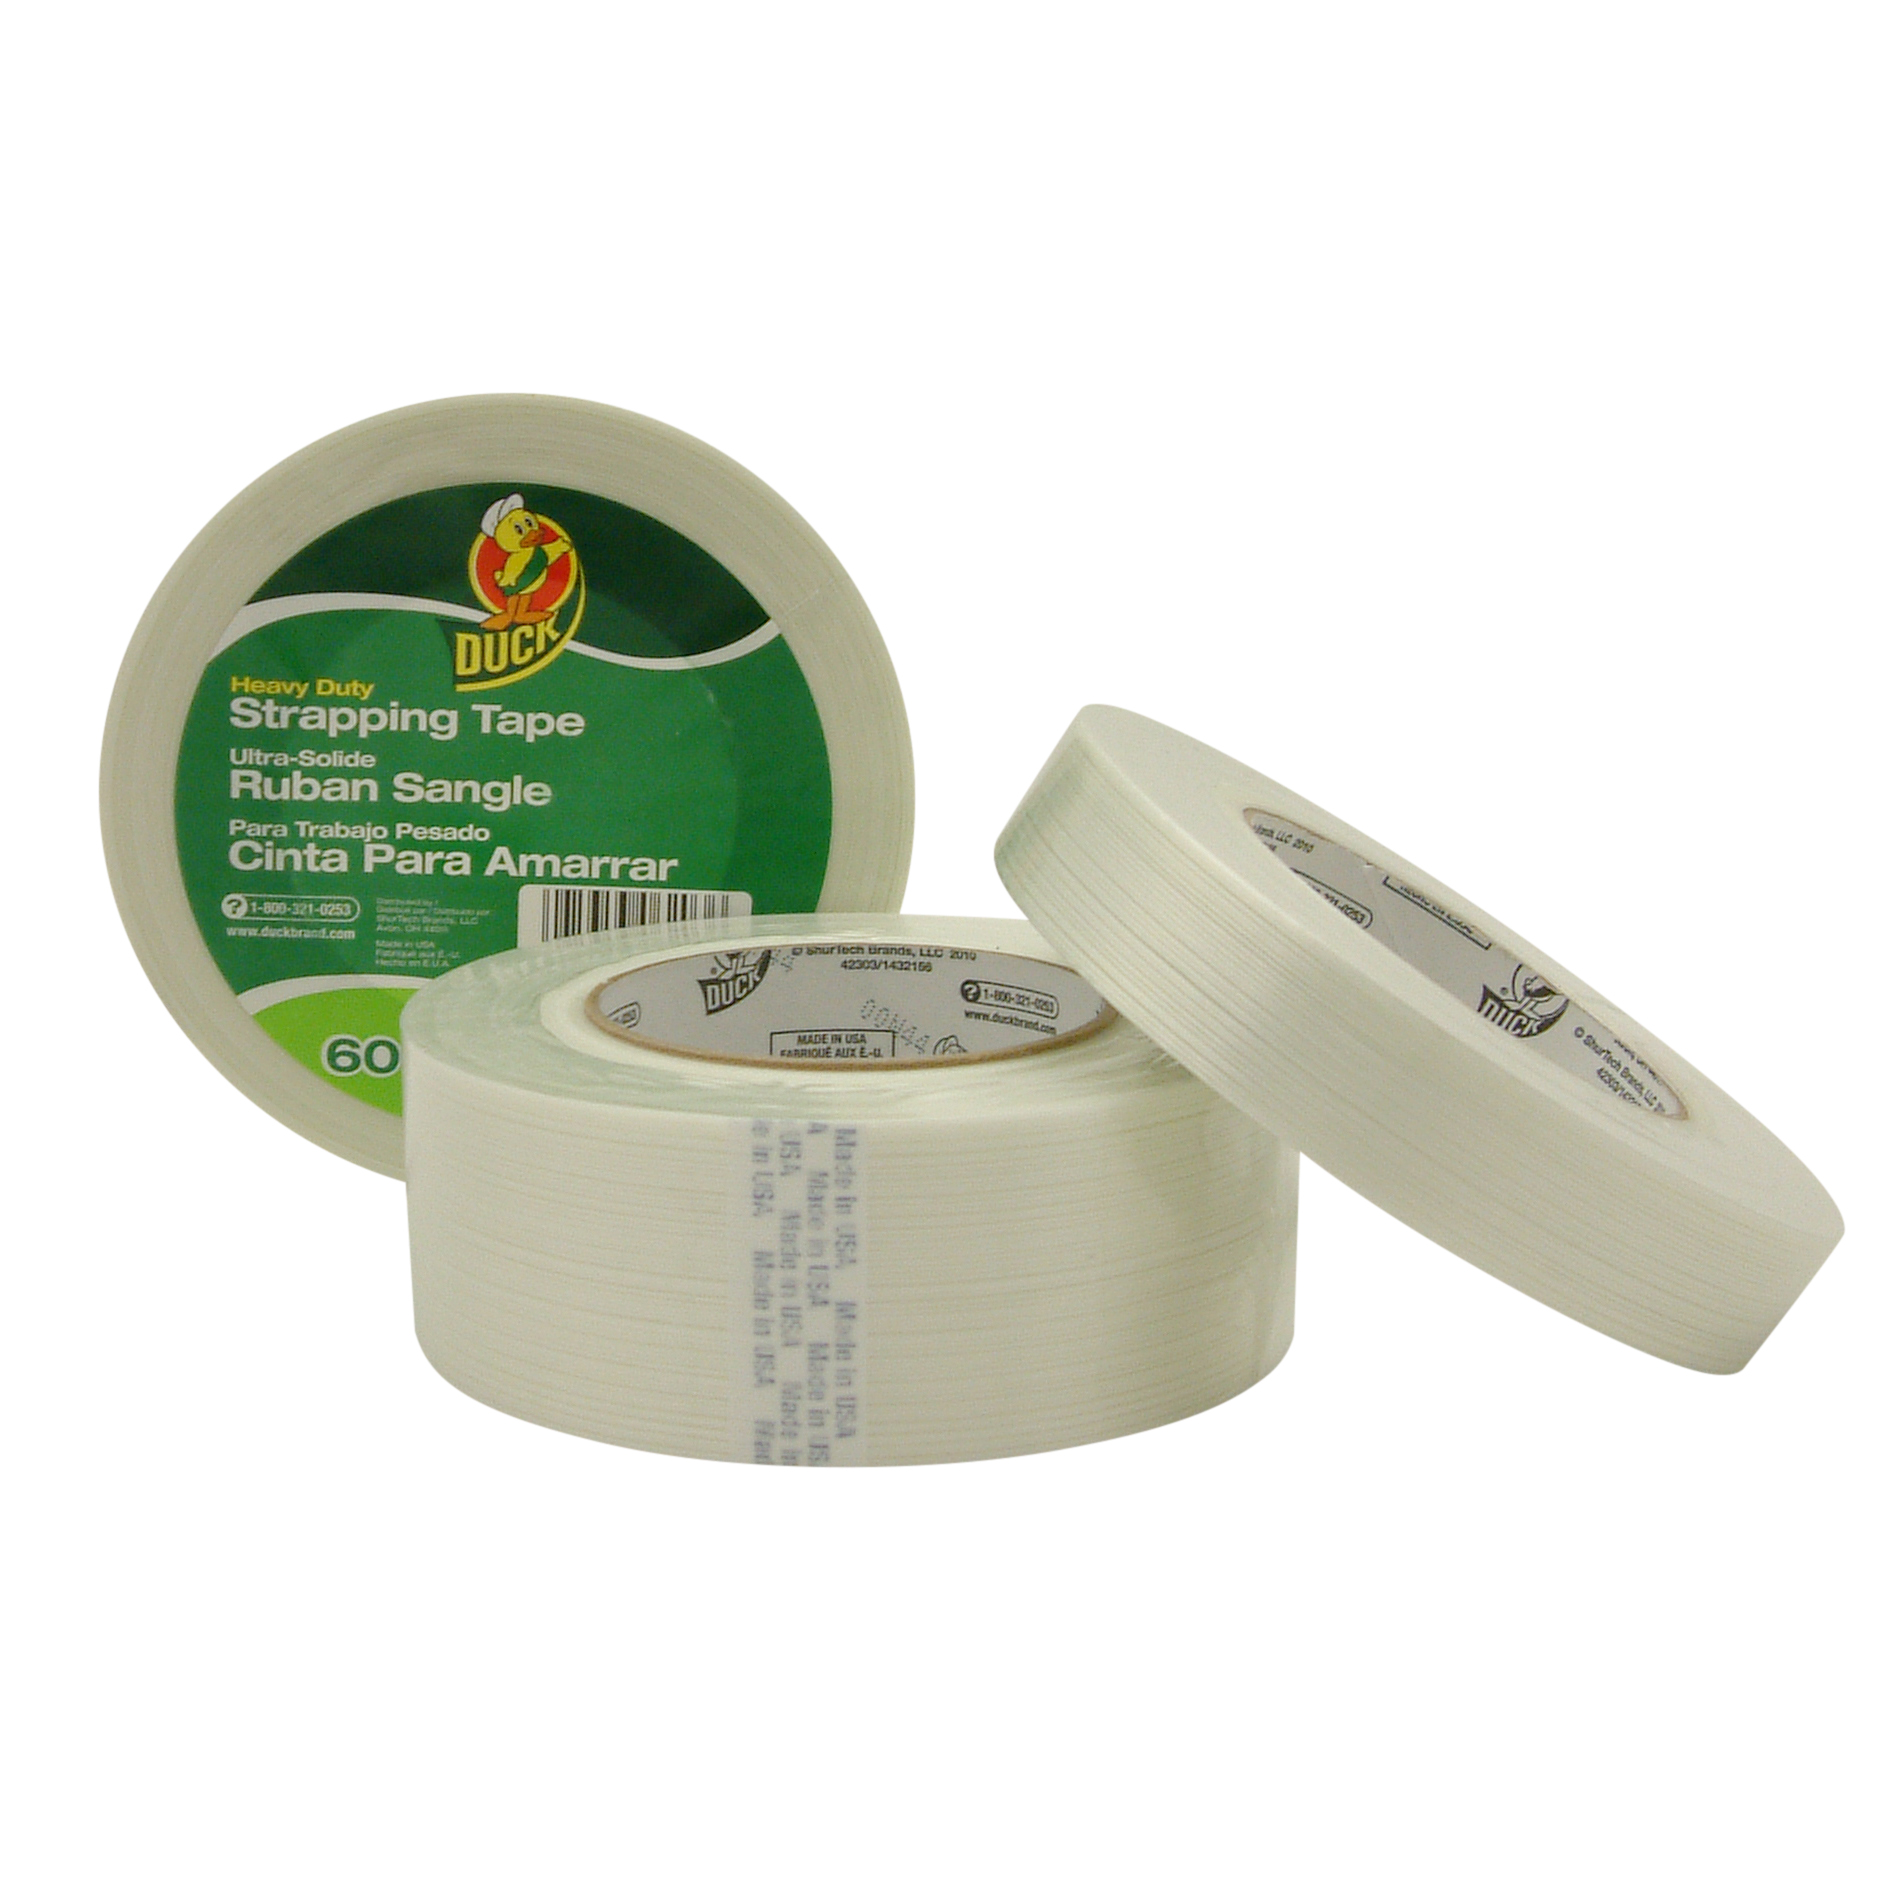 Duck Brand Heavy Duty Strapping Tape [Discontinued]